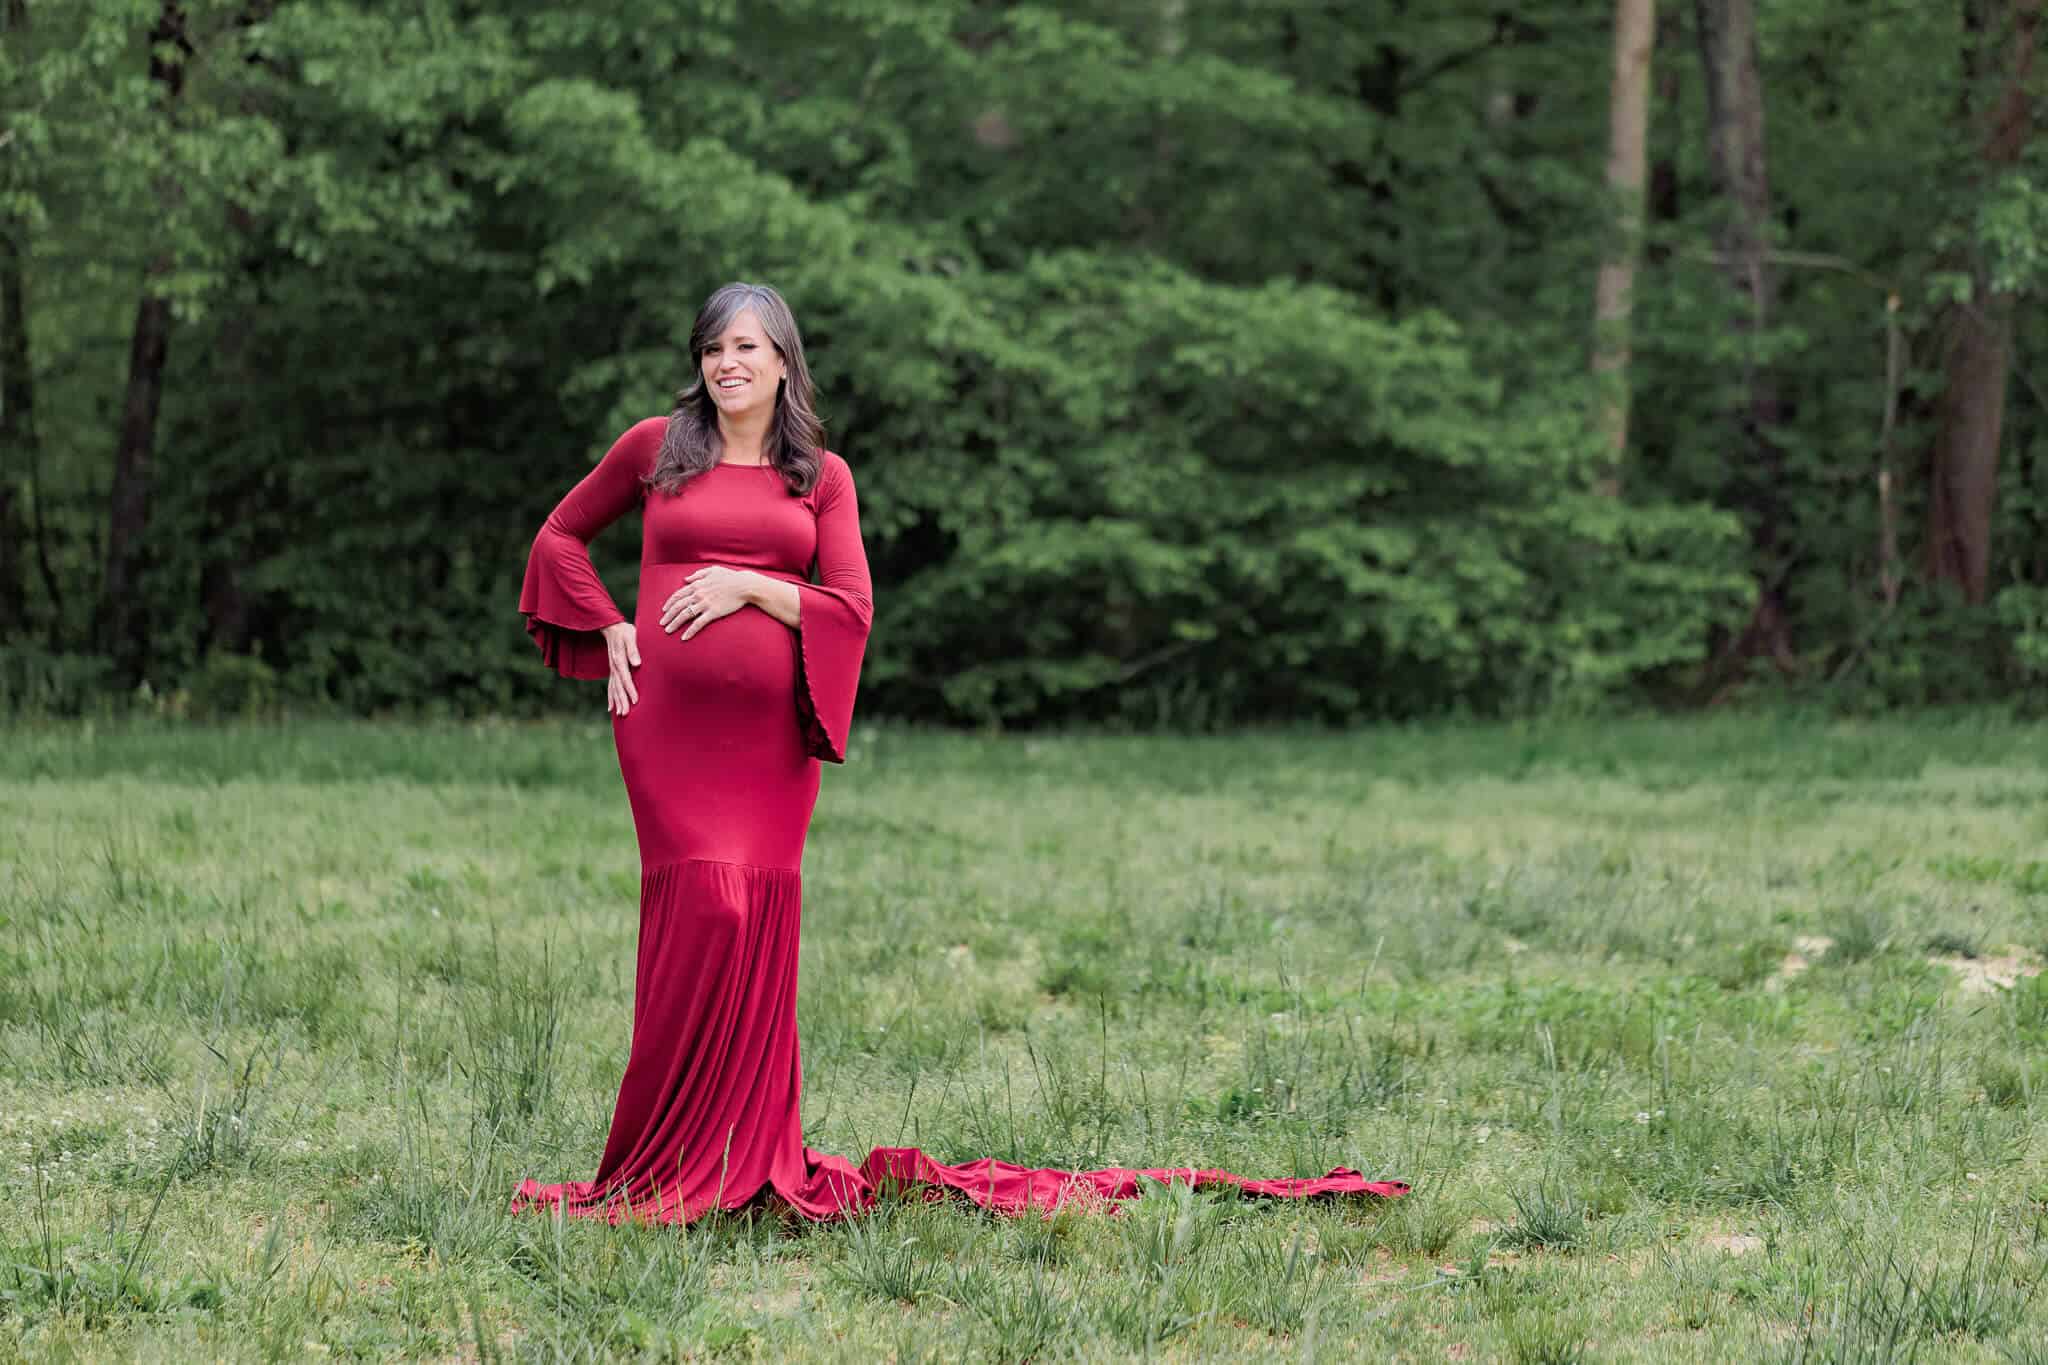 A blog article about Northern Virginia yoga featuring a pregnant woman posing in a red dress.